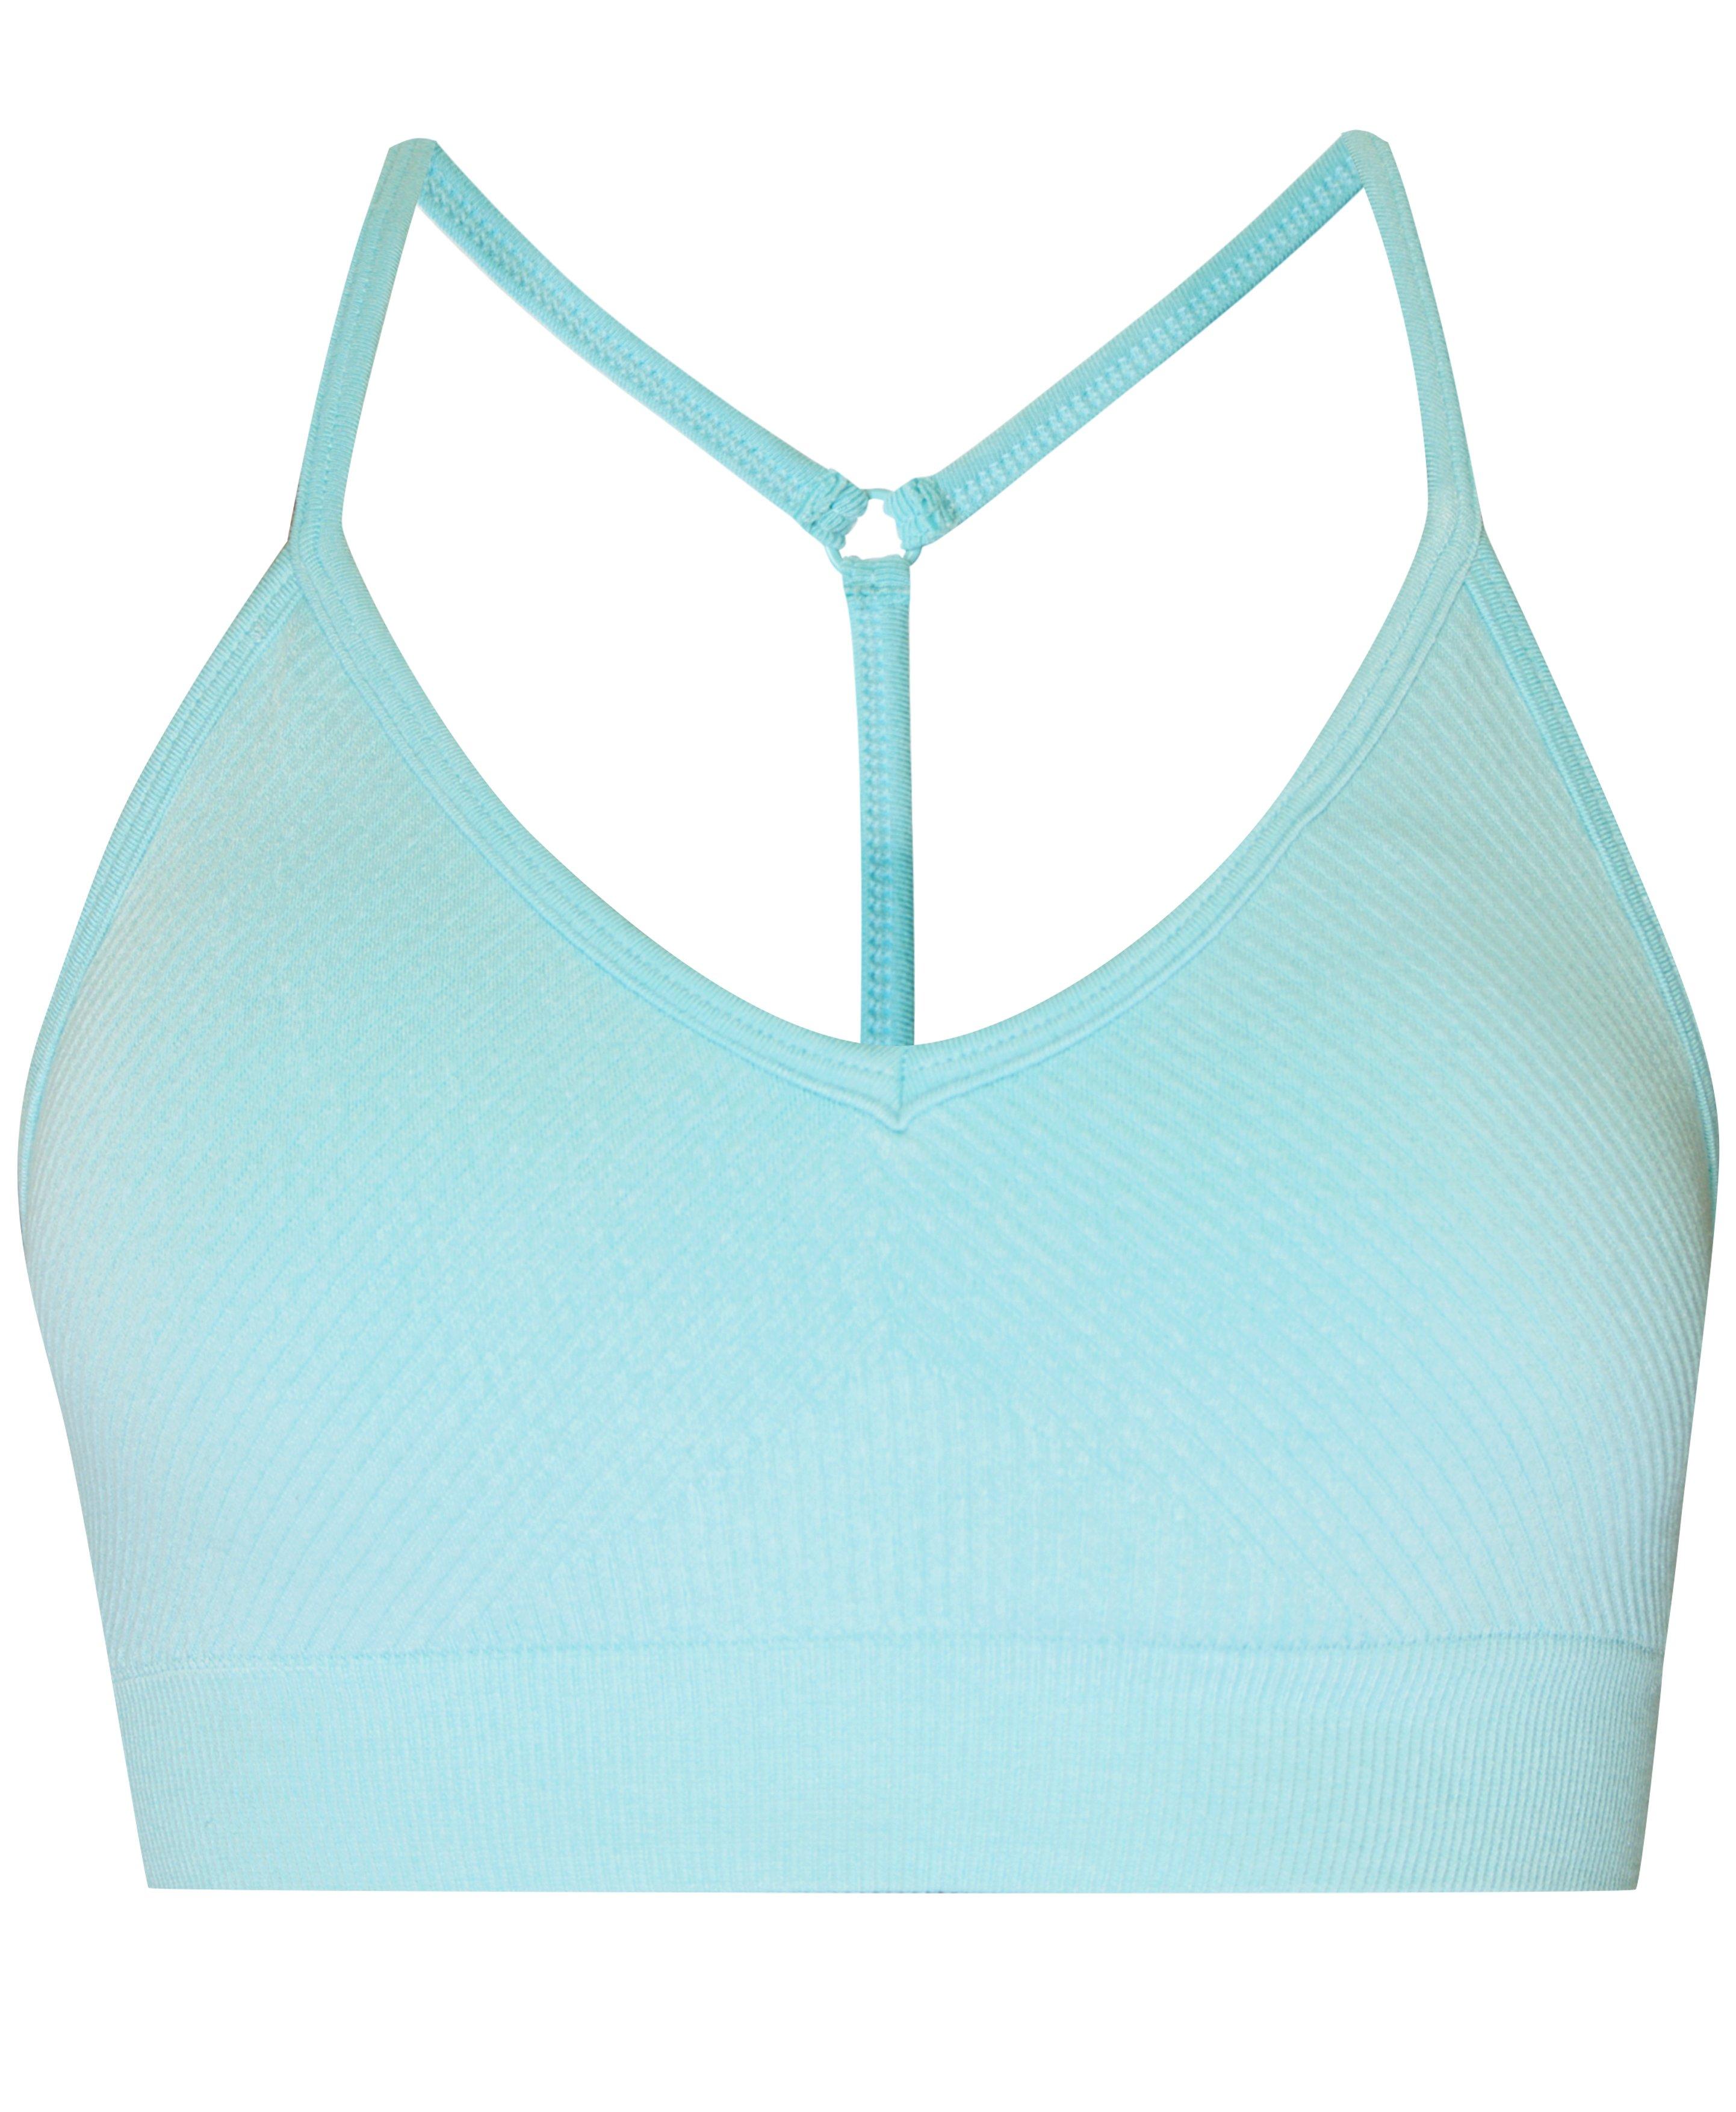 PULLIMORE Women Seamlesss Racerback Sport Bra Removable Pad Yoga Lingerie  Bras for Yoga Gym Workout Fitness (XL, Blue)